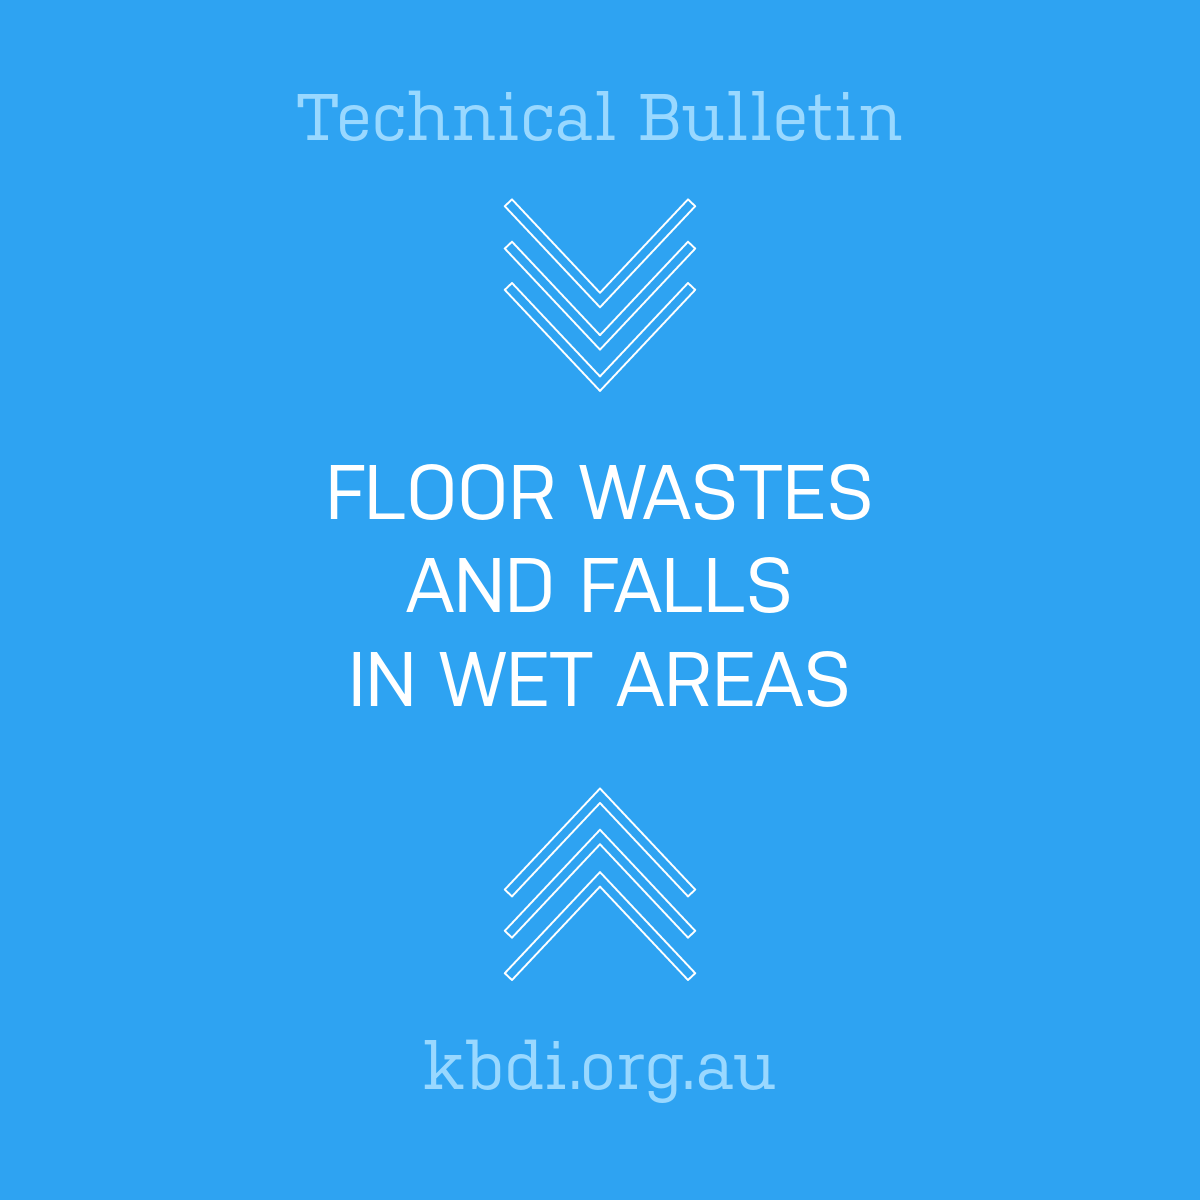 Technical Bulletin - Floor Wastes & Falls in Wet Areas